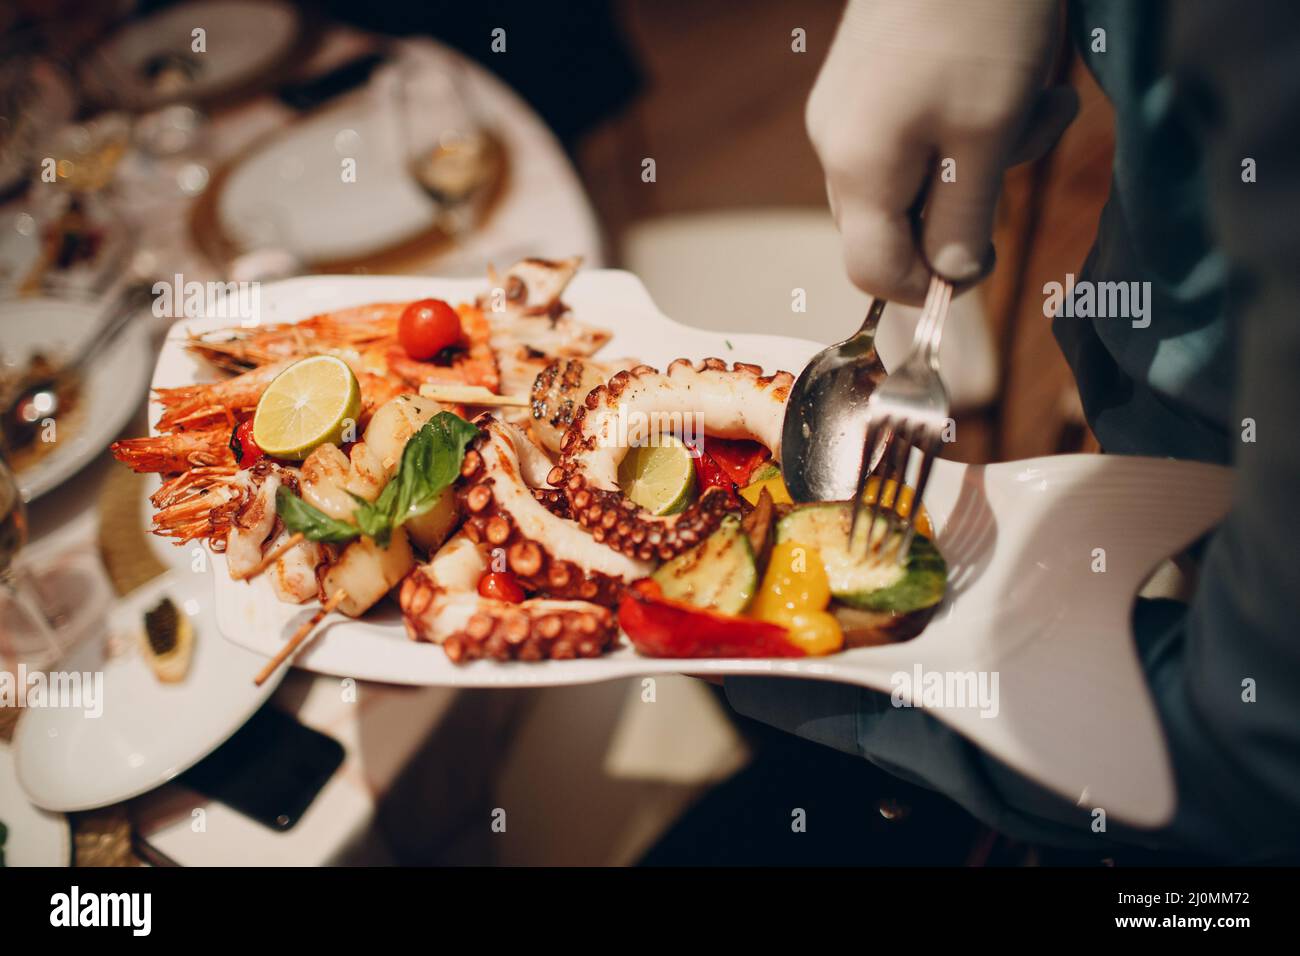 A waiter in a restaurant holds seafood dishes and serves a table catering Concept Healthy food octopus and crabs shellfish Stock Photo